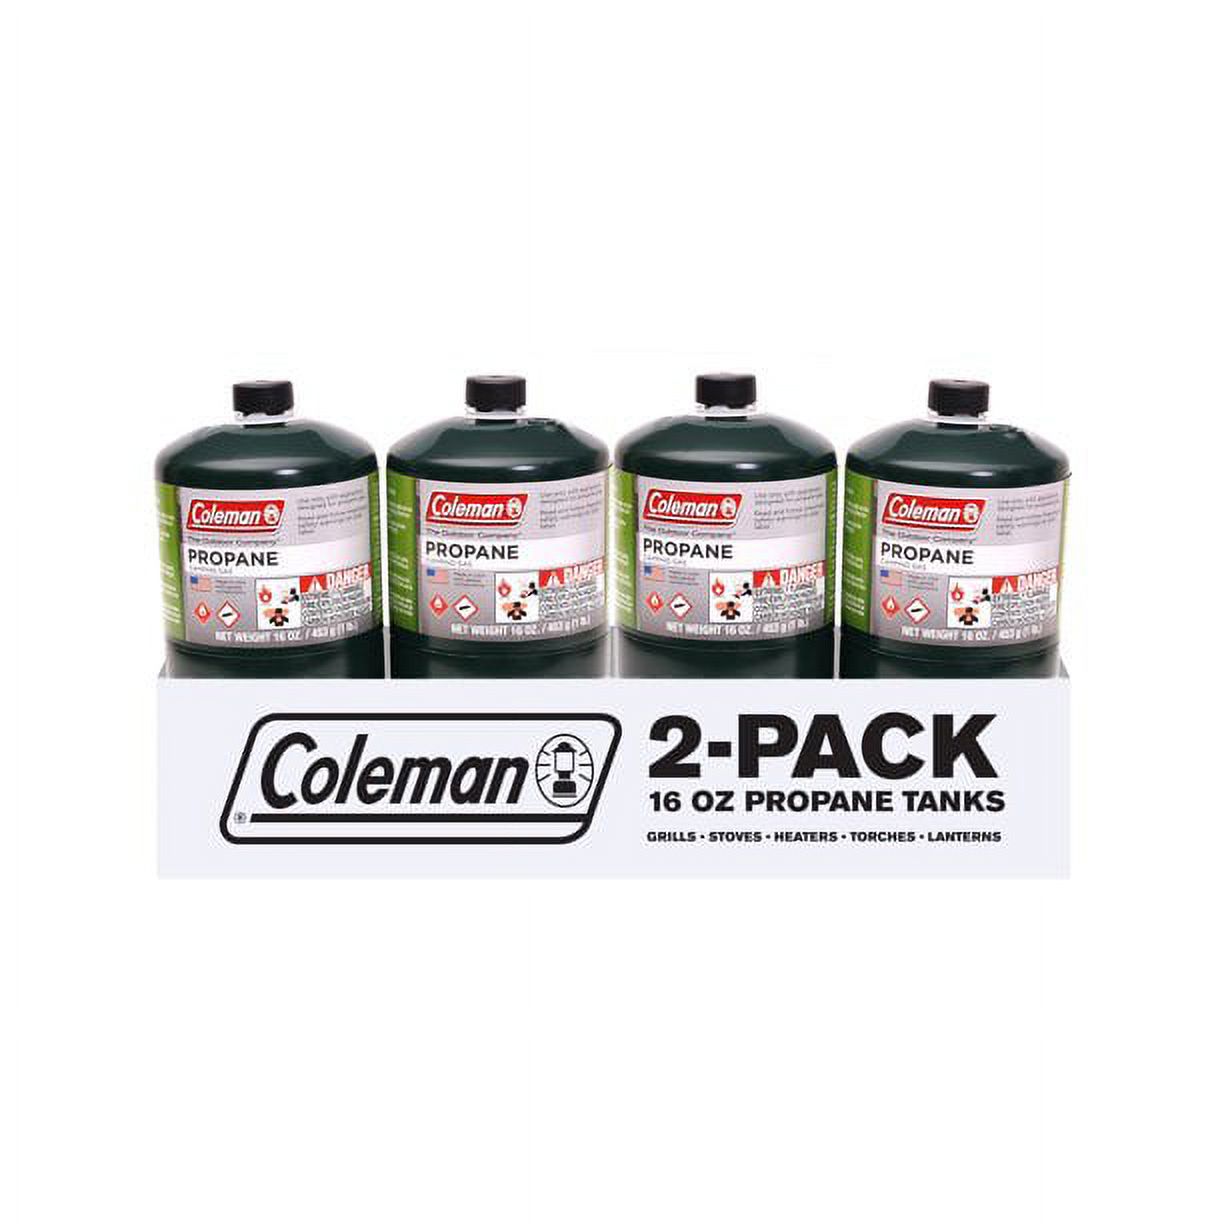 Coleman Propane Camping Gas Cylinder 2-Pack - image 2 of 3